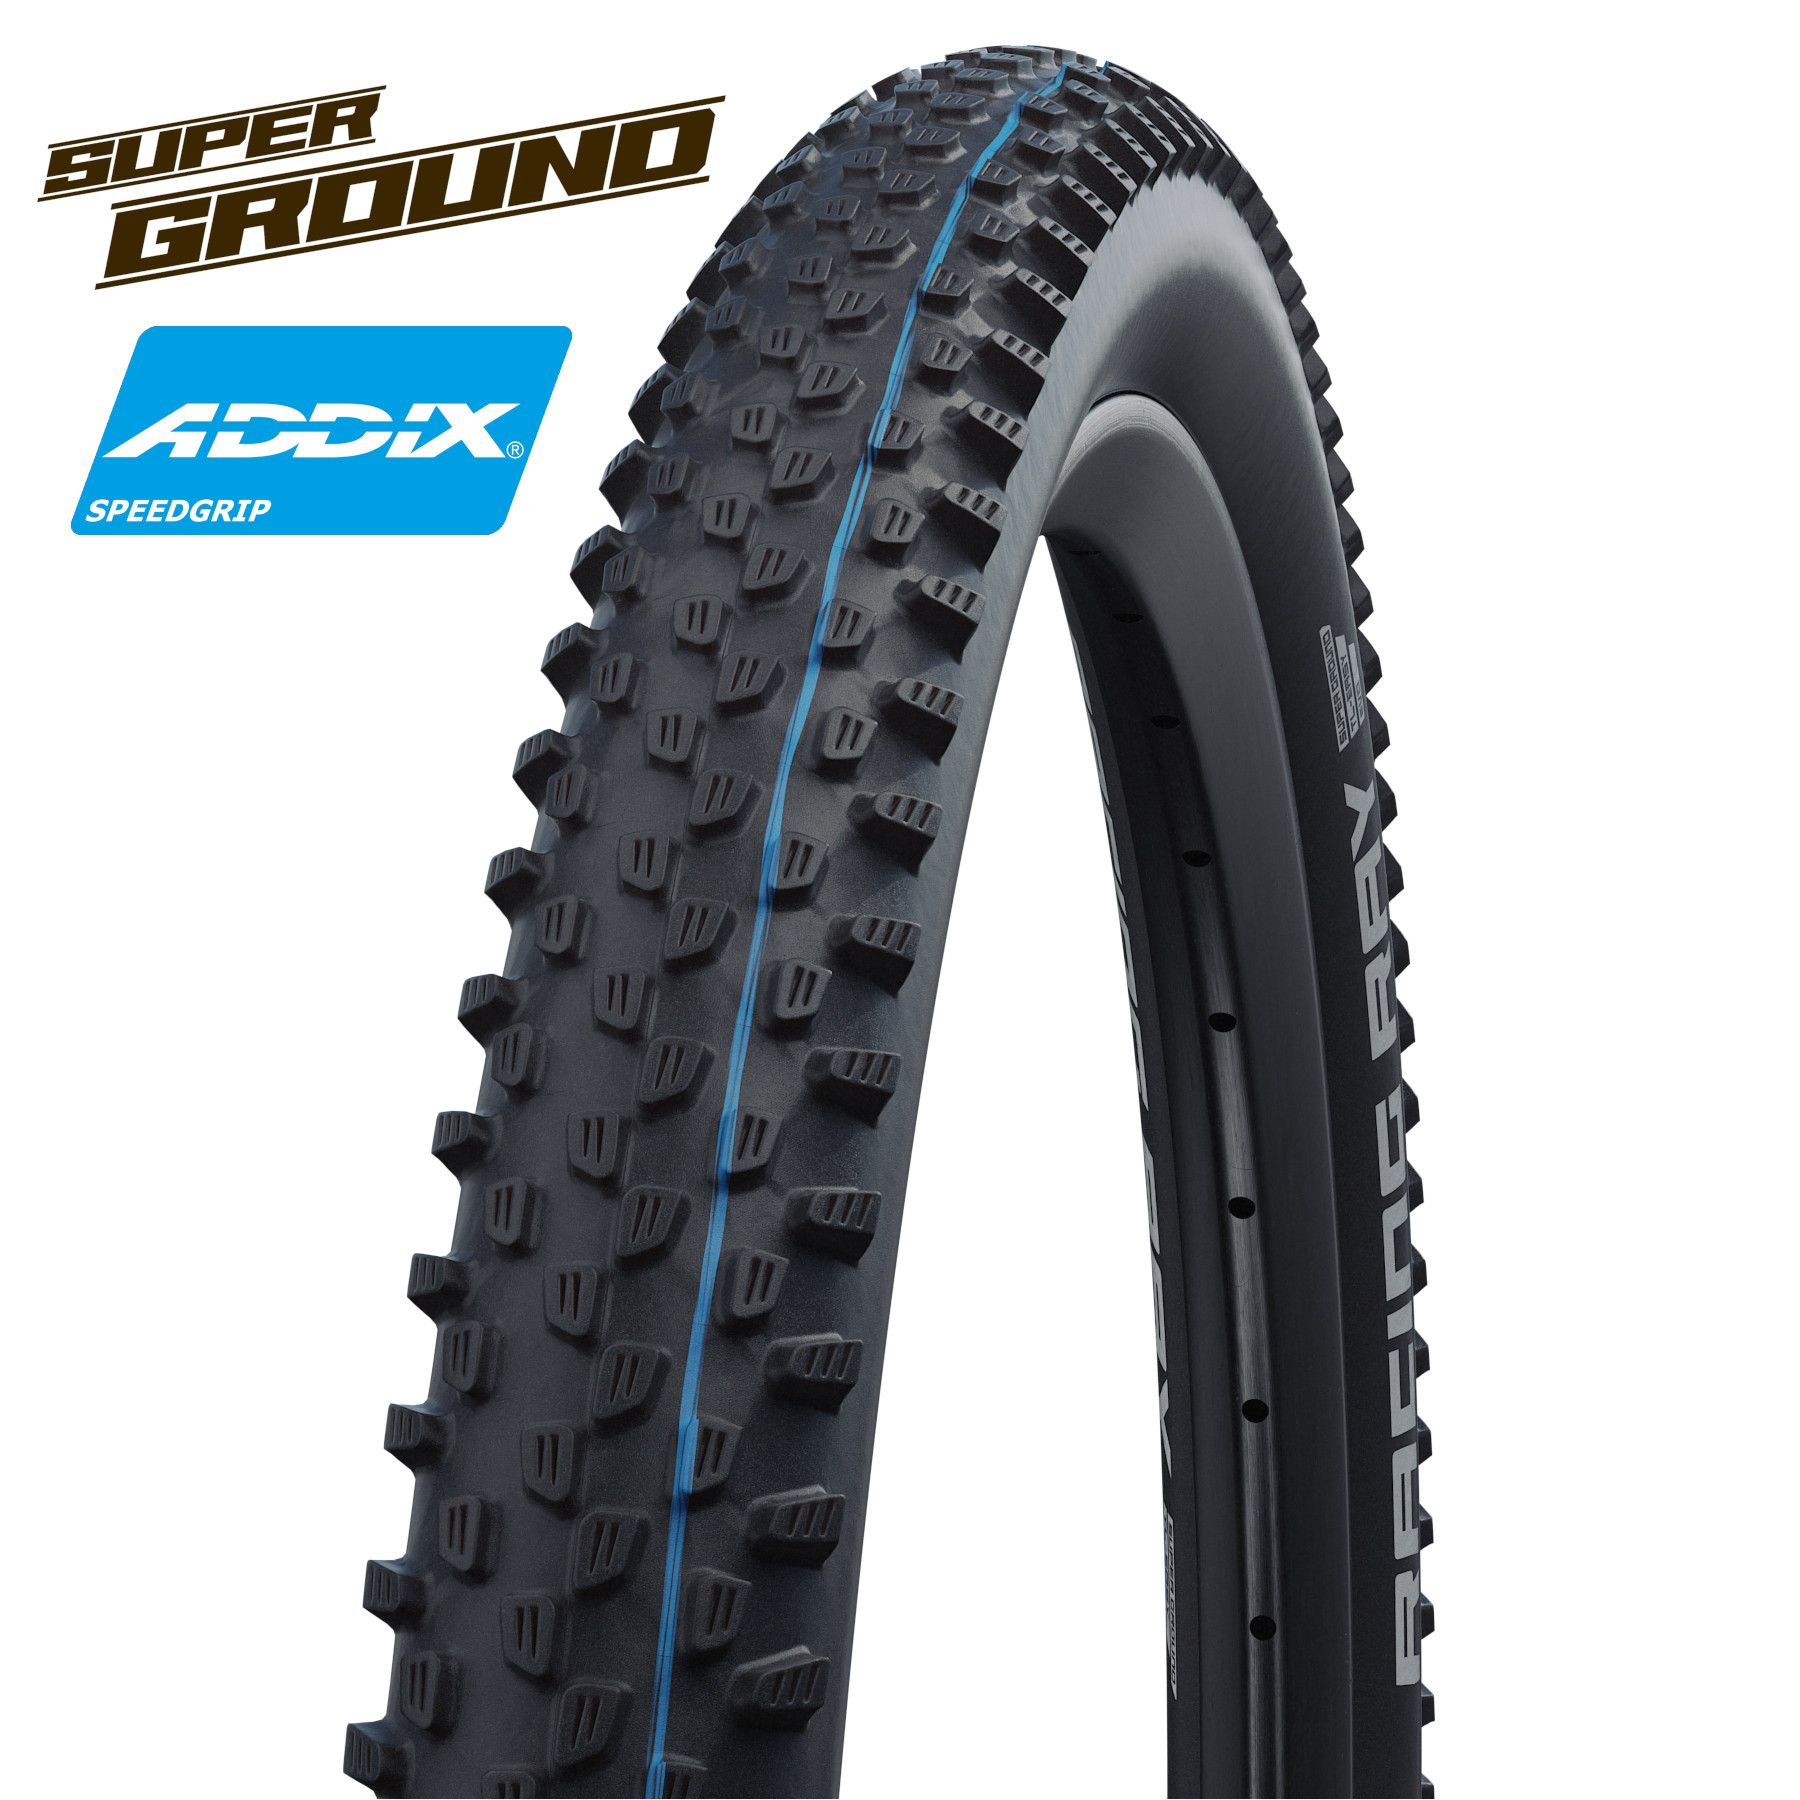 Picture of Schwalbe Racing Ray Evolution MTB Folding Tire - AddixSpeedGrip - SuperGround - TLEasy - E-25 - 29x2.1 Inches